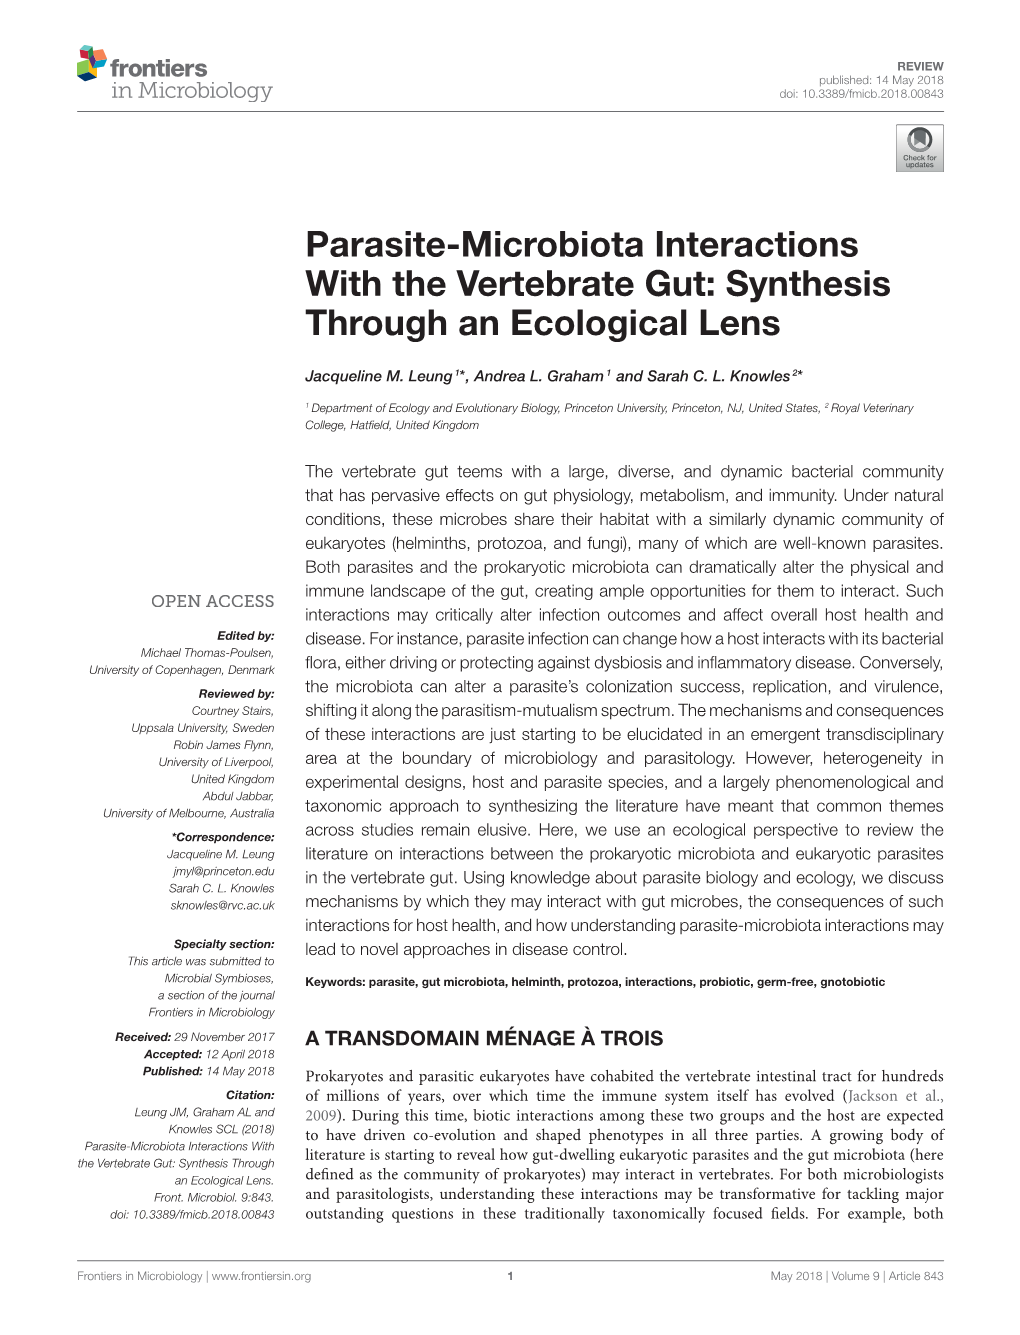 Parasite-Microbiota Interactions with the Vertebrate Gut: Synthesis Through an Ecological Lens